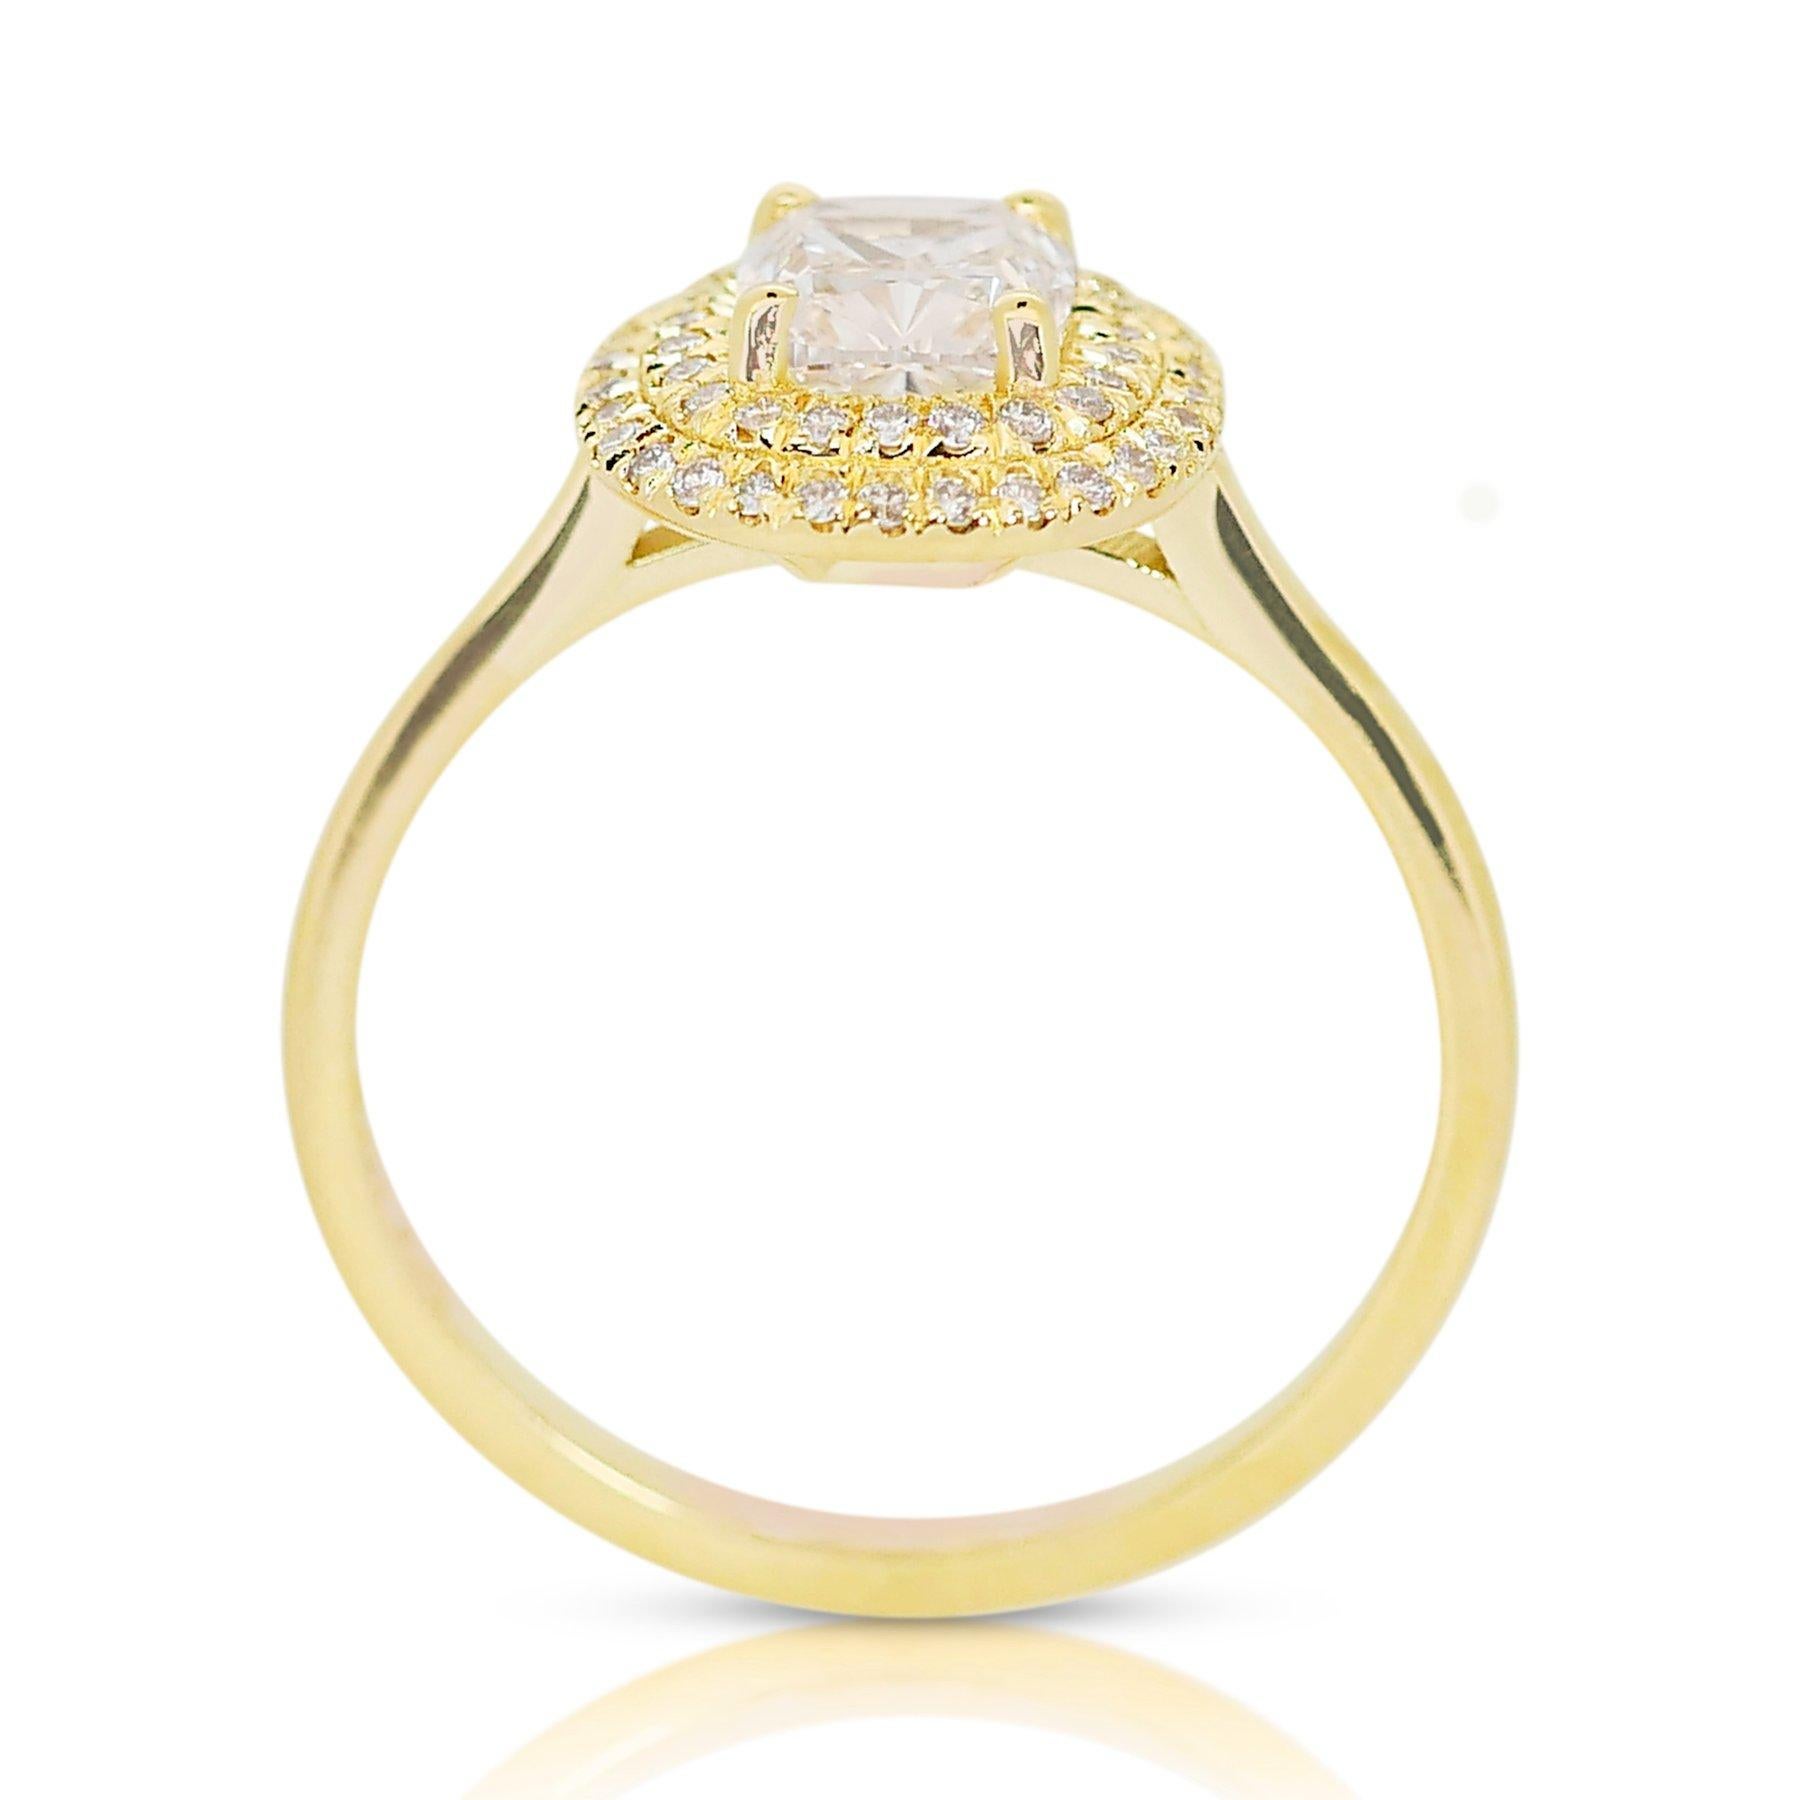 Majestic 1.78ct Diamond Halo Ring in 18k Yellow Gold - GIA Certified For Sale 2